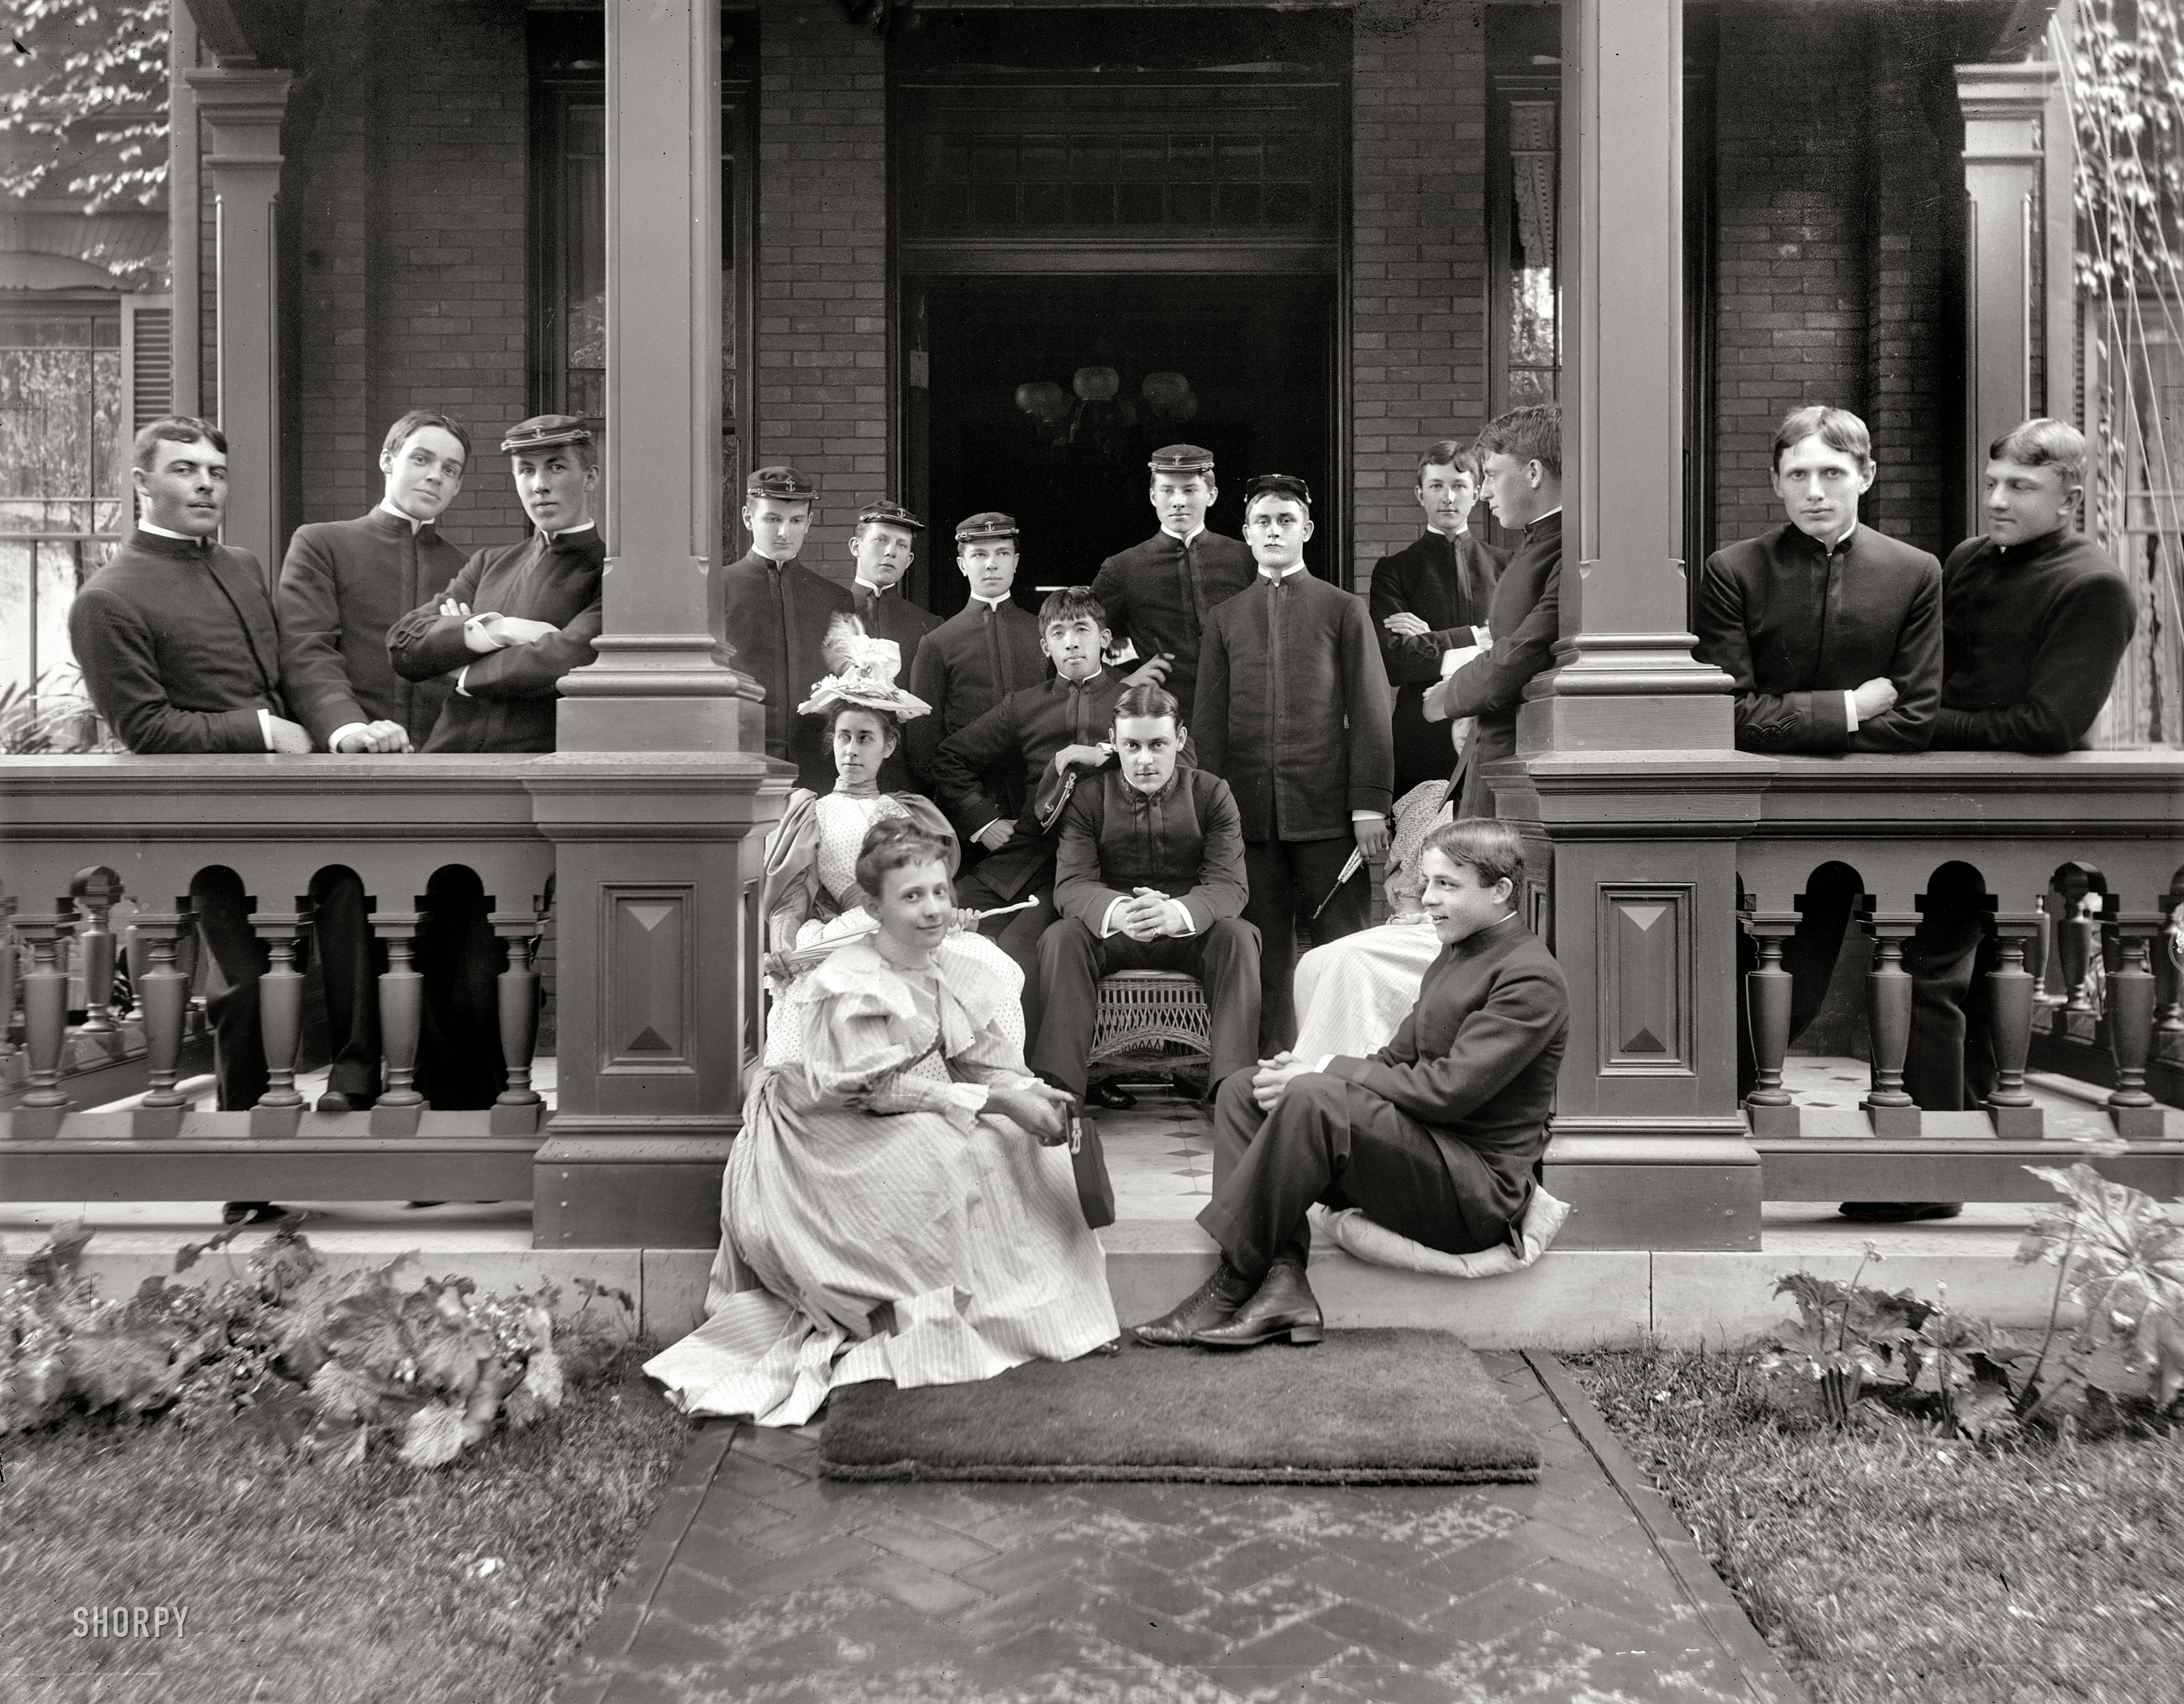 Annapolis, Maryland, circa 1901. "Cadets at residence of superintendent, U.S. Naval Academy." 8x10 glass negative, Detroit Publishing Co. View full size.